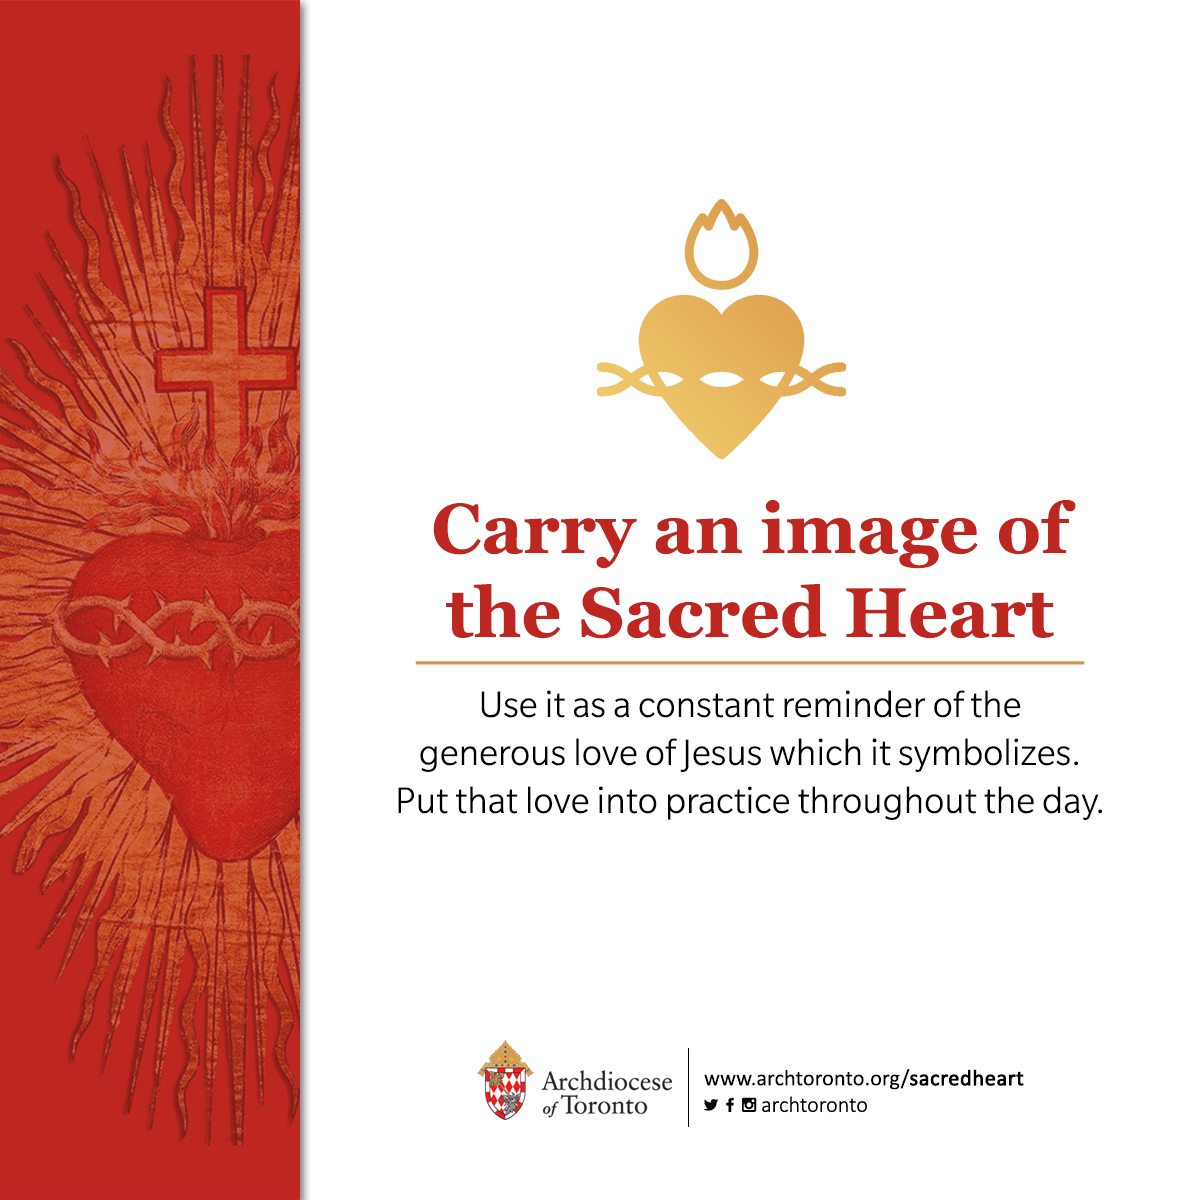 Carry an image of the Sacred Heart